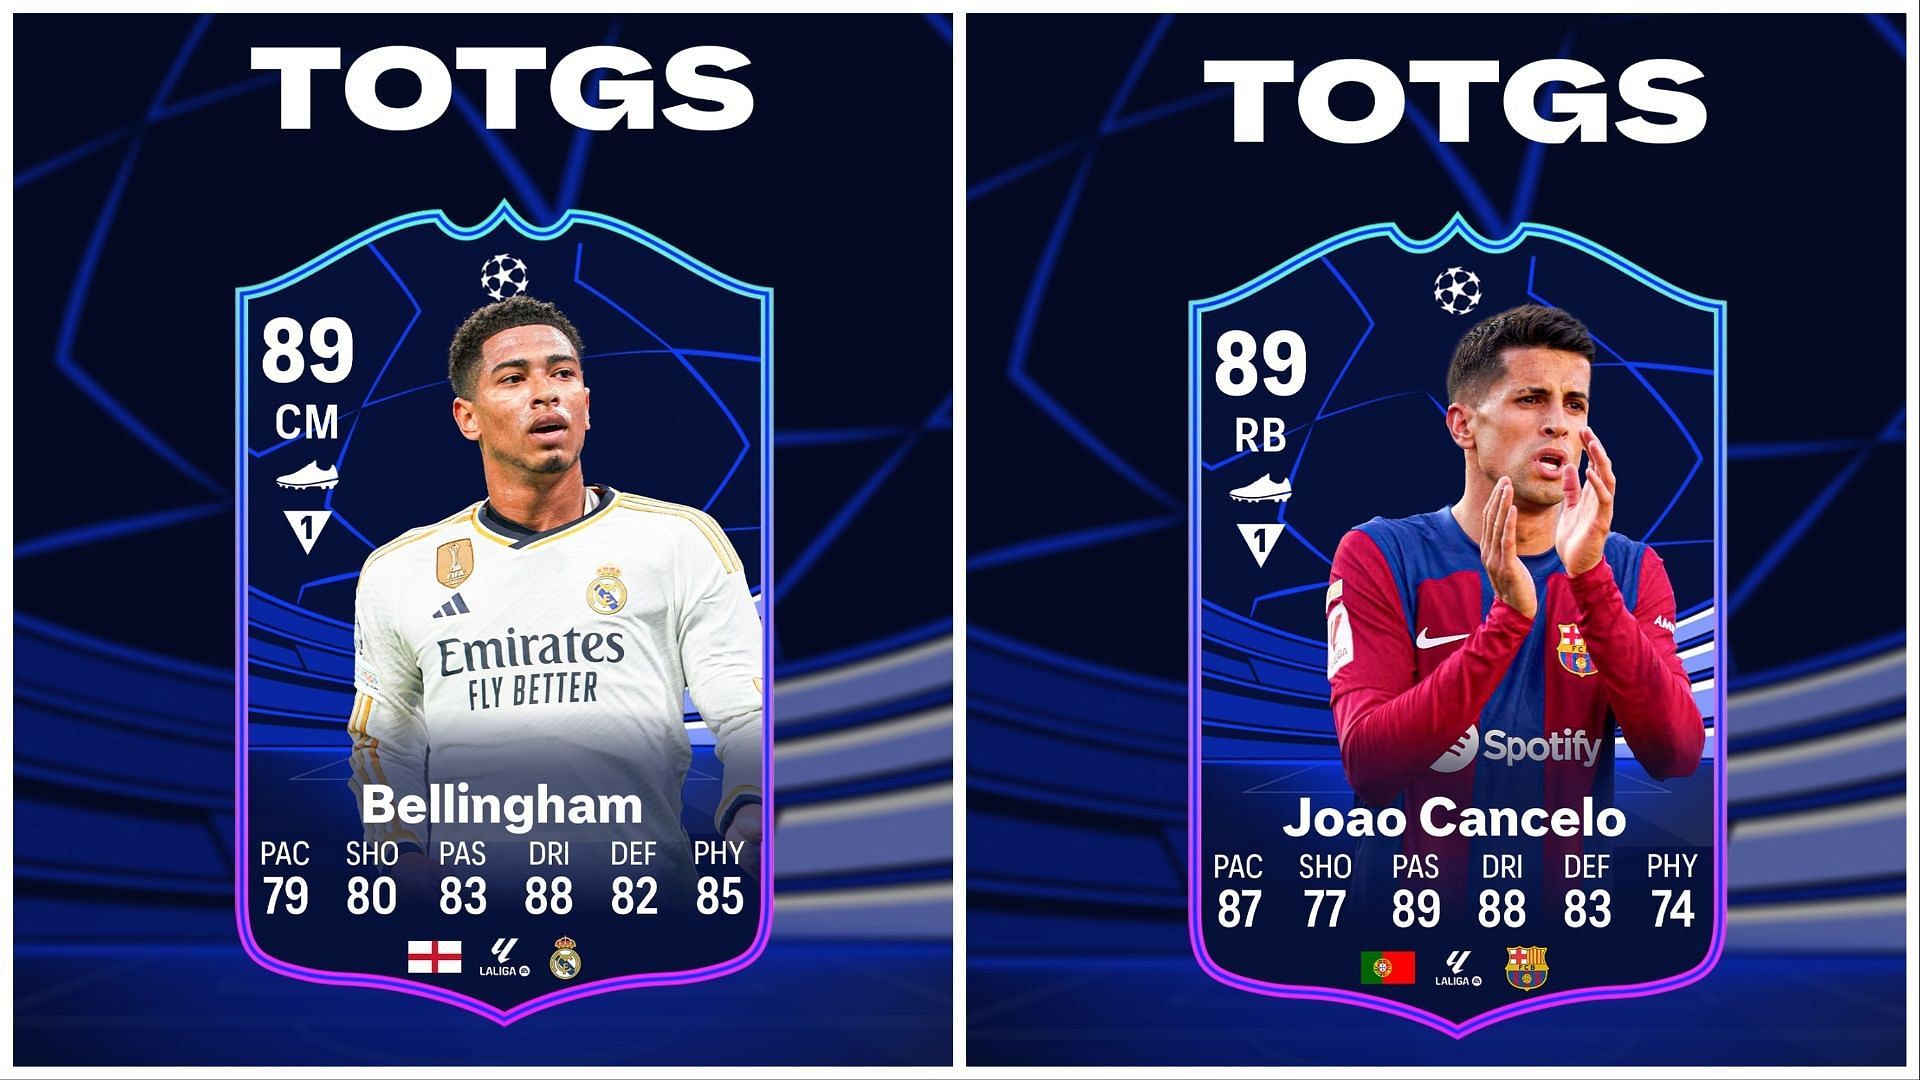 TOTGS players have been leaked (Images via Twitter/itsZtradingZ and Twitter/FUTPoliceLeaks)